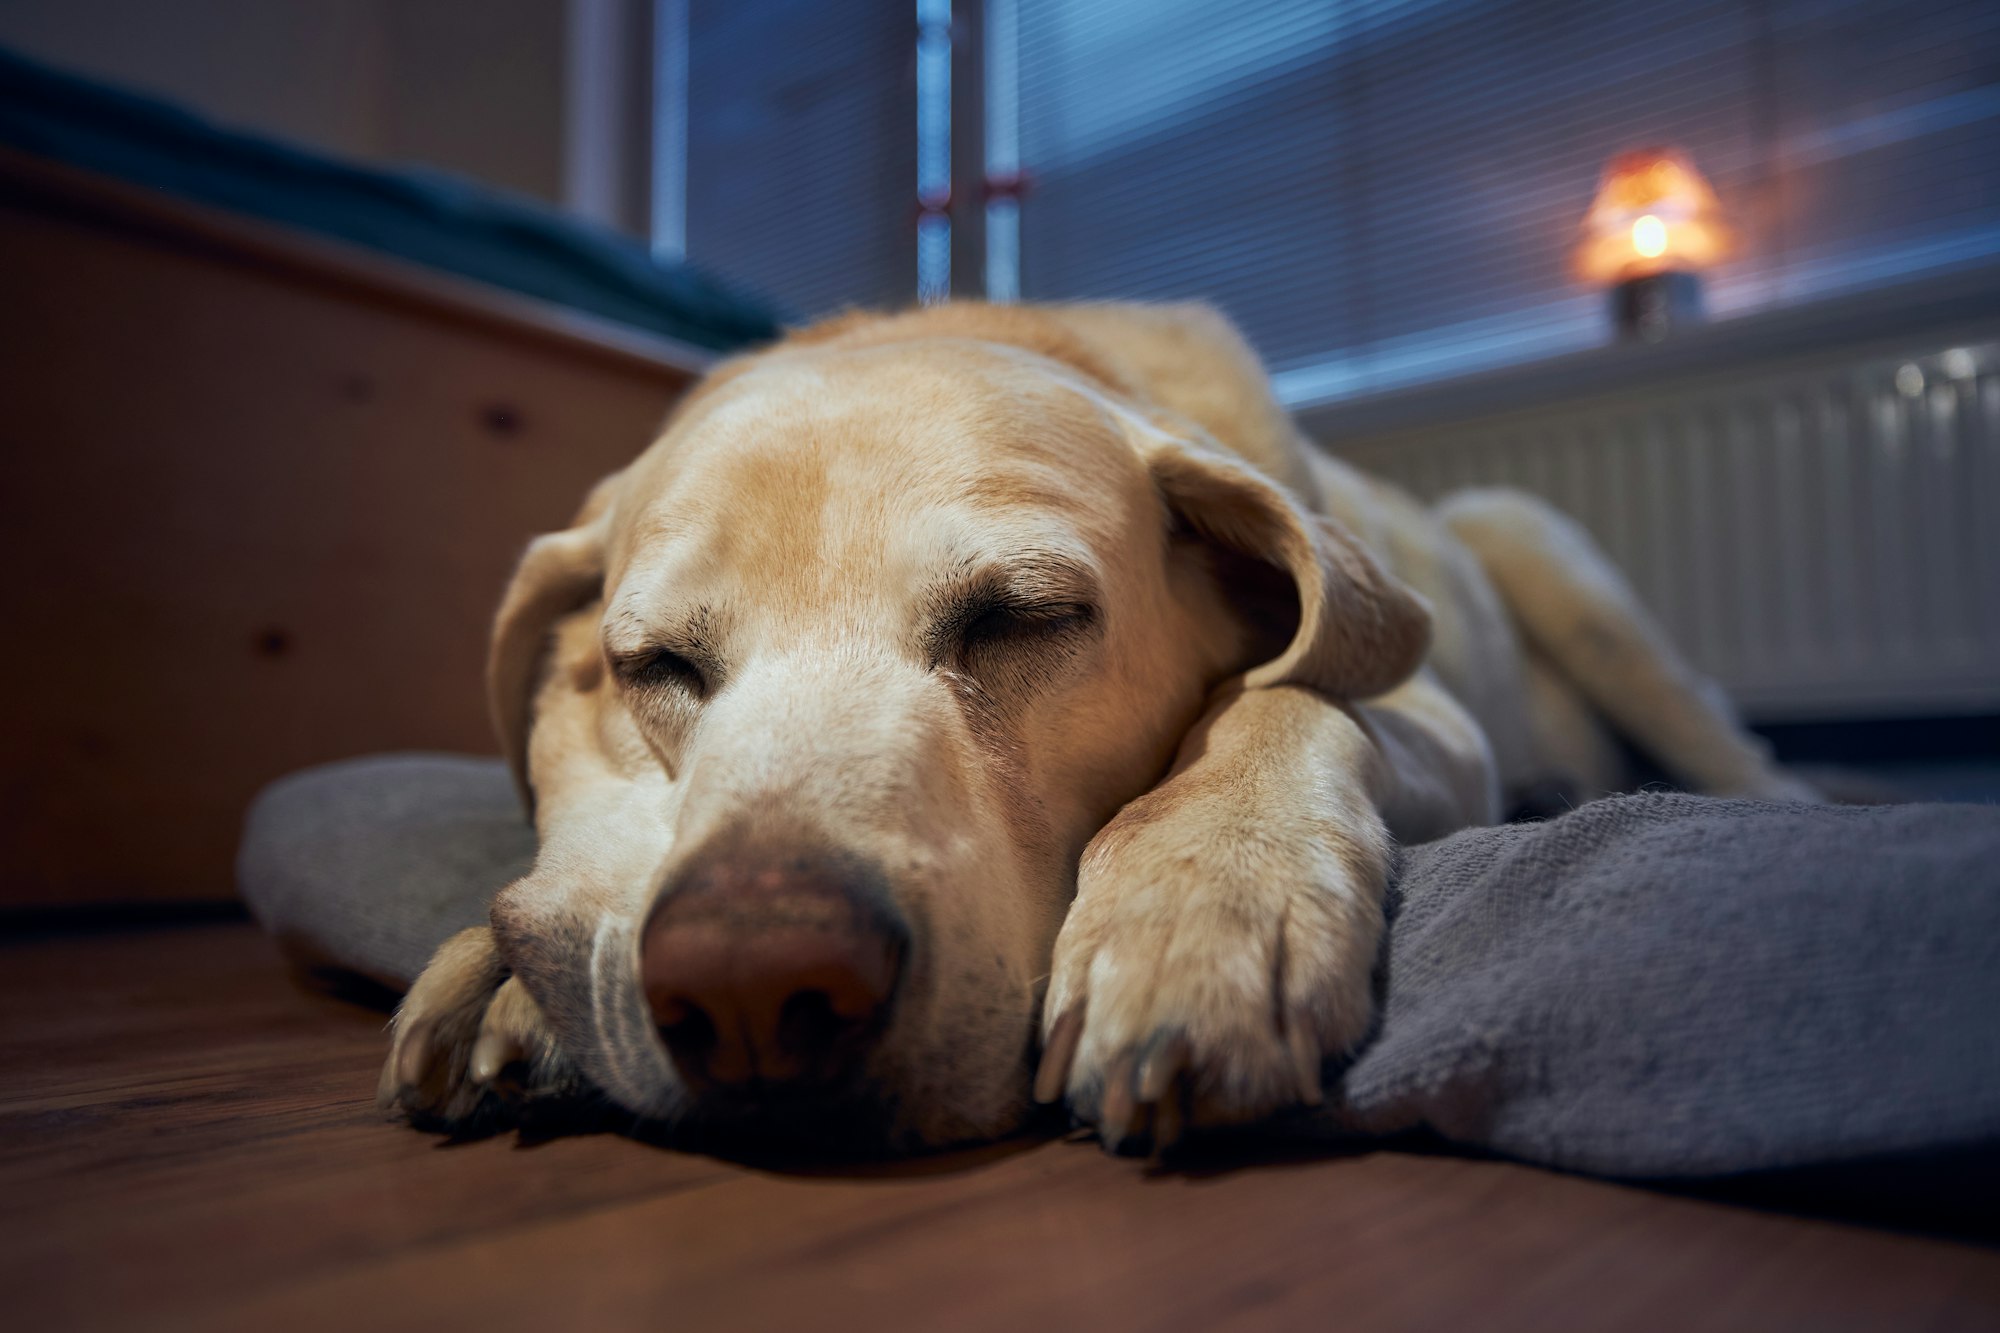 Old dog (labrador retriever) sleeping on his pet bed under window at home.